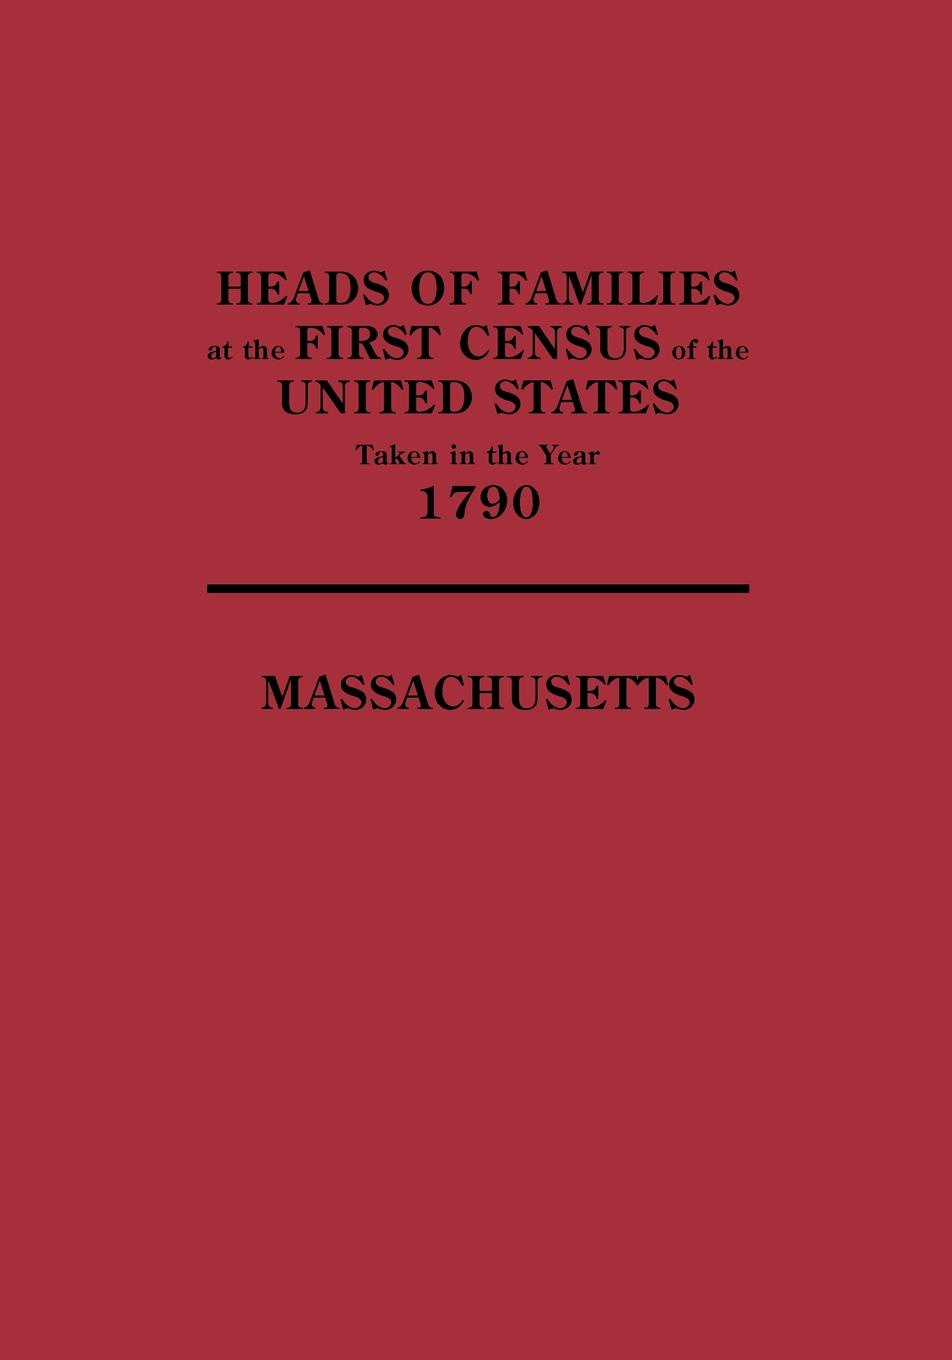 Heads of Families at the First Census of the United States Taken in the Year 1790. Massachusetts